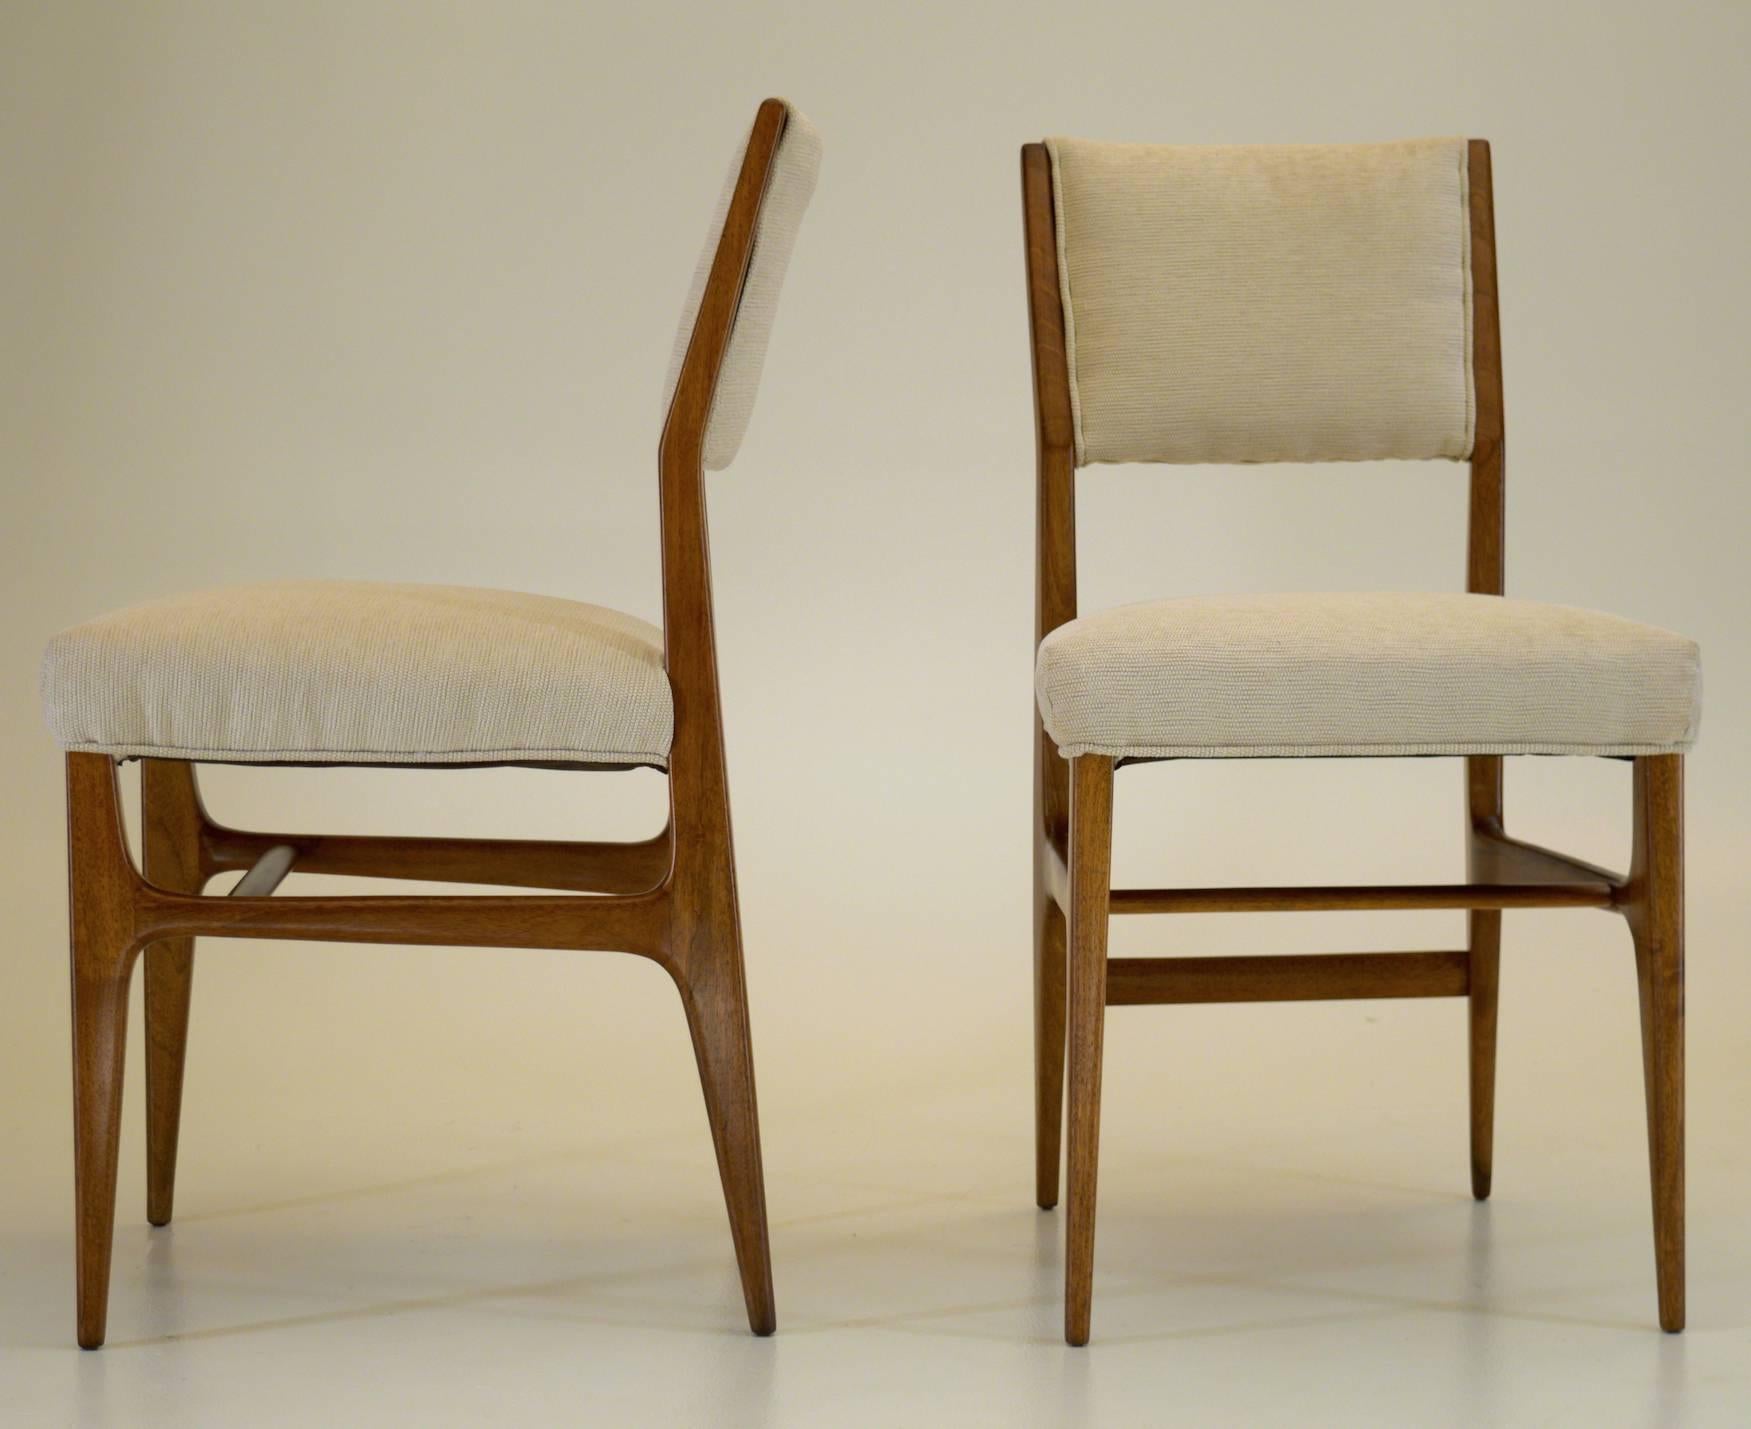 Gio Ponti dining set of four chairs.

Measures: 34.25" tall, 17.5" wide, seat height 17-18". Remnants of M. Singer and Sons label is affixed beneath dining table but not chairs.

The dining table in a separate listing for